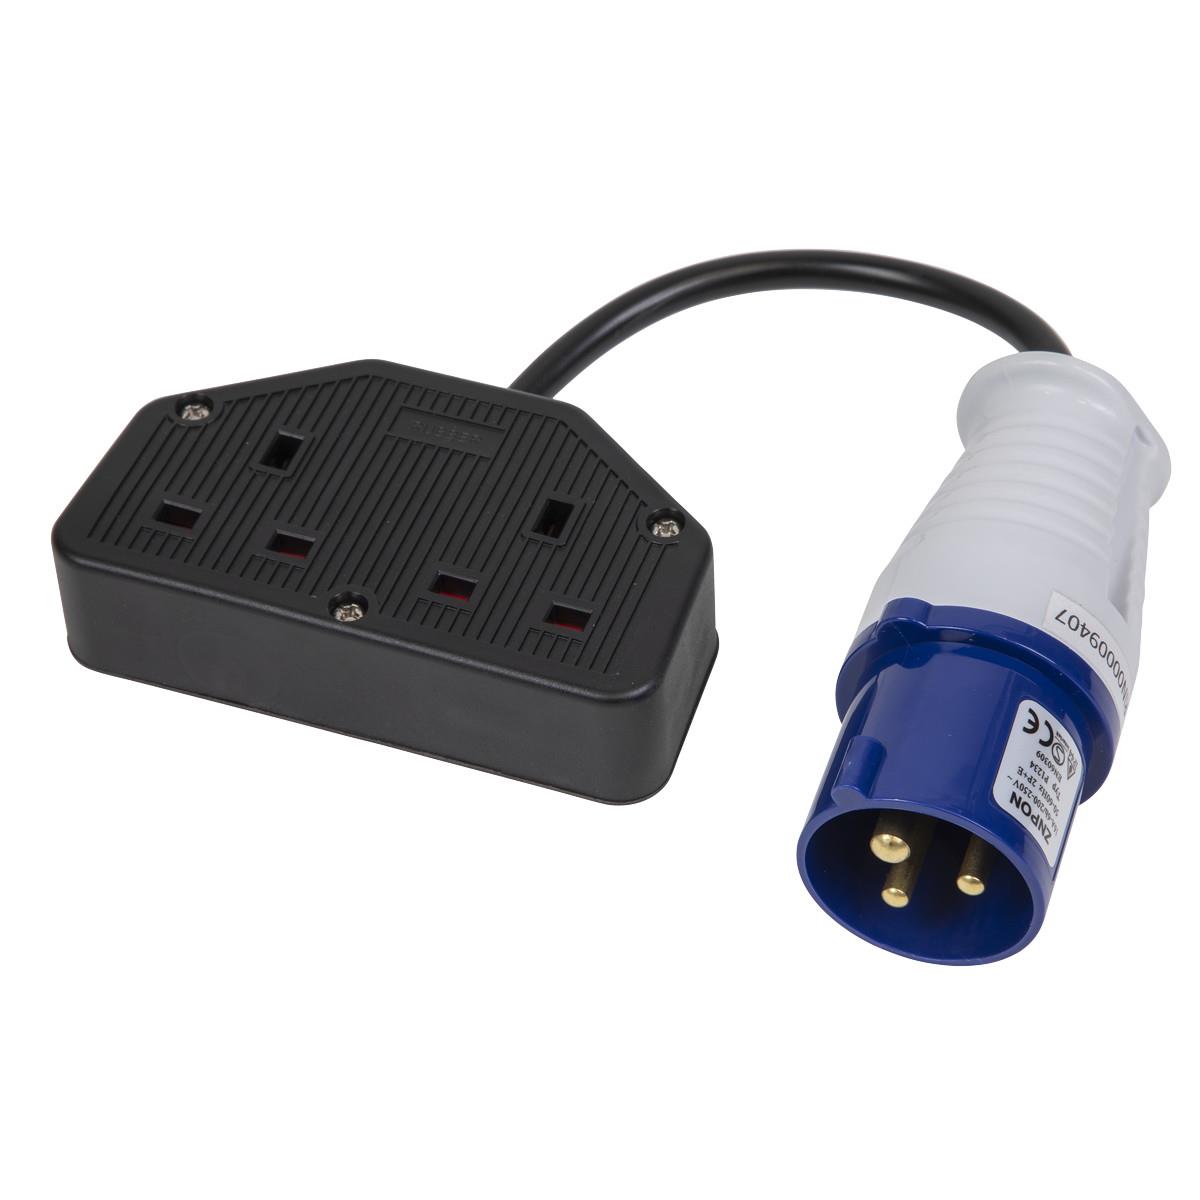 Sealey WPS16132 Trailing/Fly Lead; 16Amp Plug to Double 3 Pin 13 Amp Socket; 350mm Long Cable